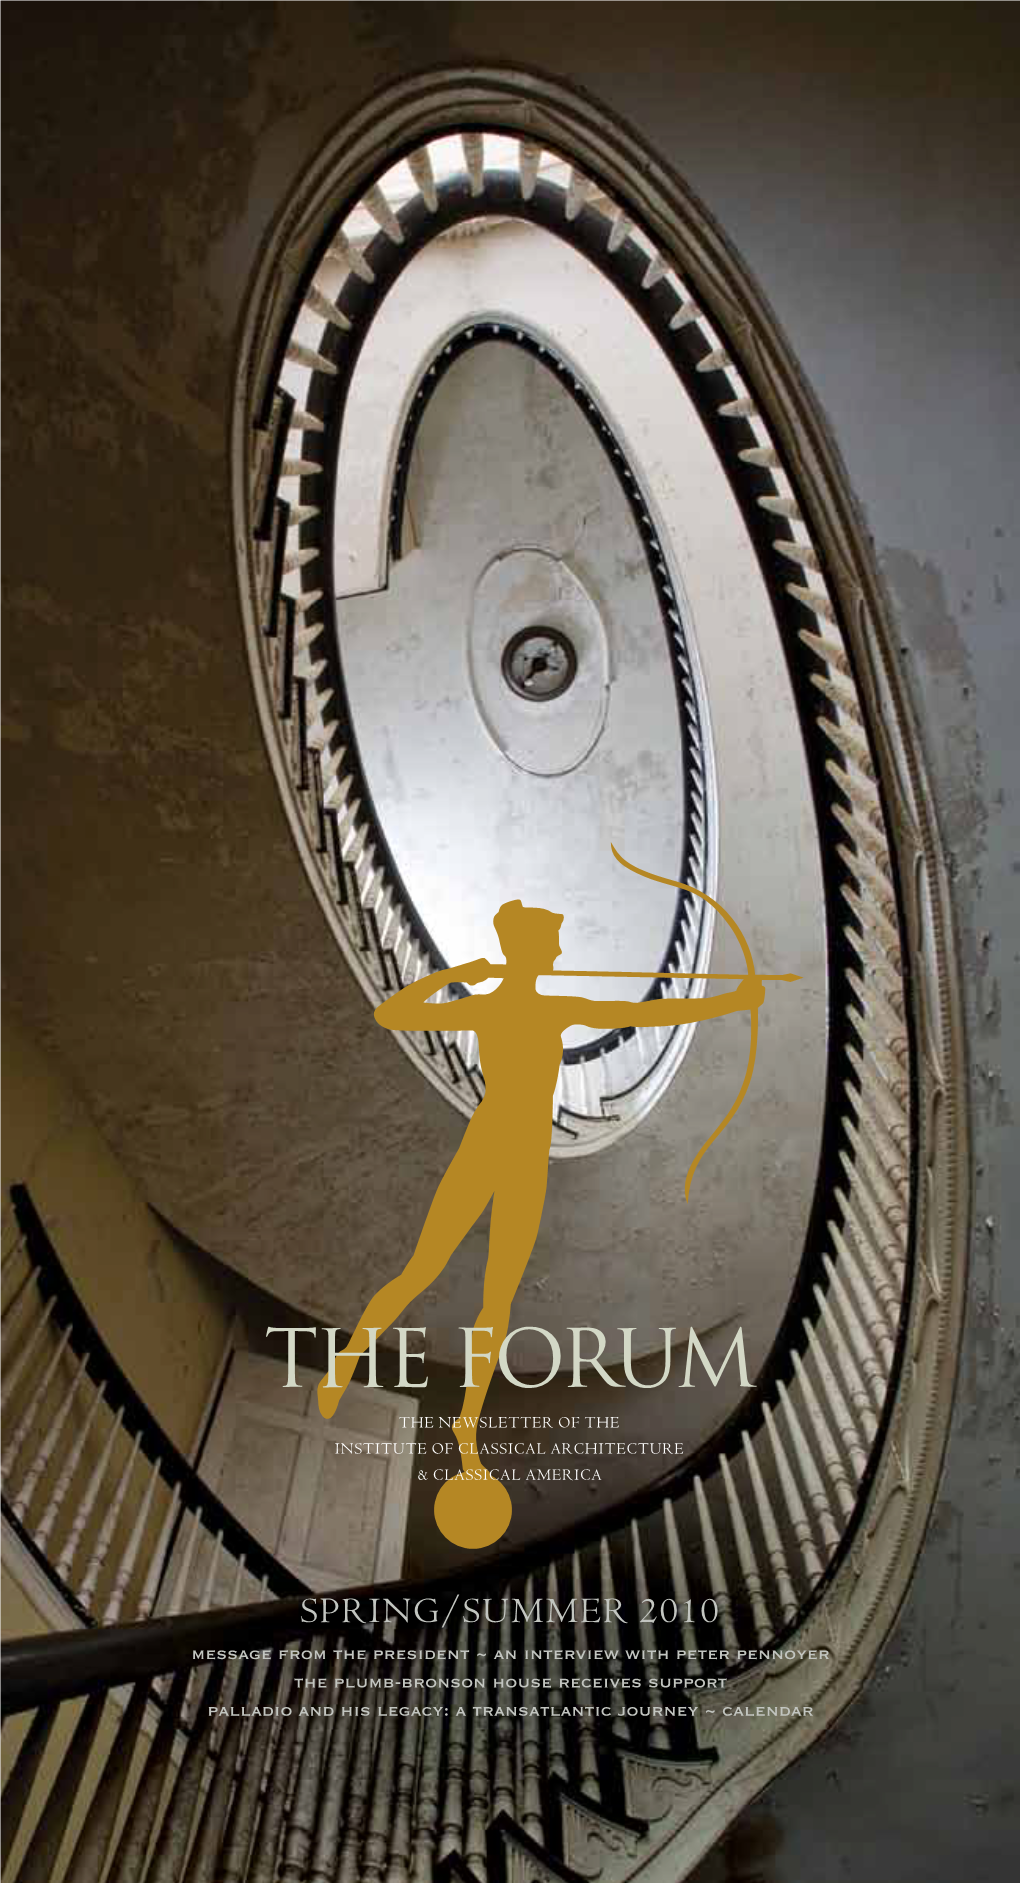 The Forum the NEWSLETTER of the INSTITUTE of CLASSICAL ARCHITECTURE & CLASSICAL AMERICA